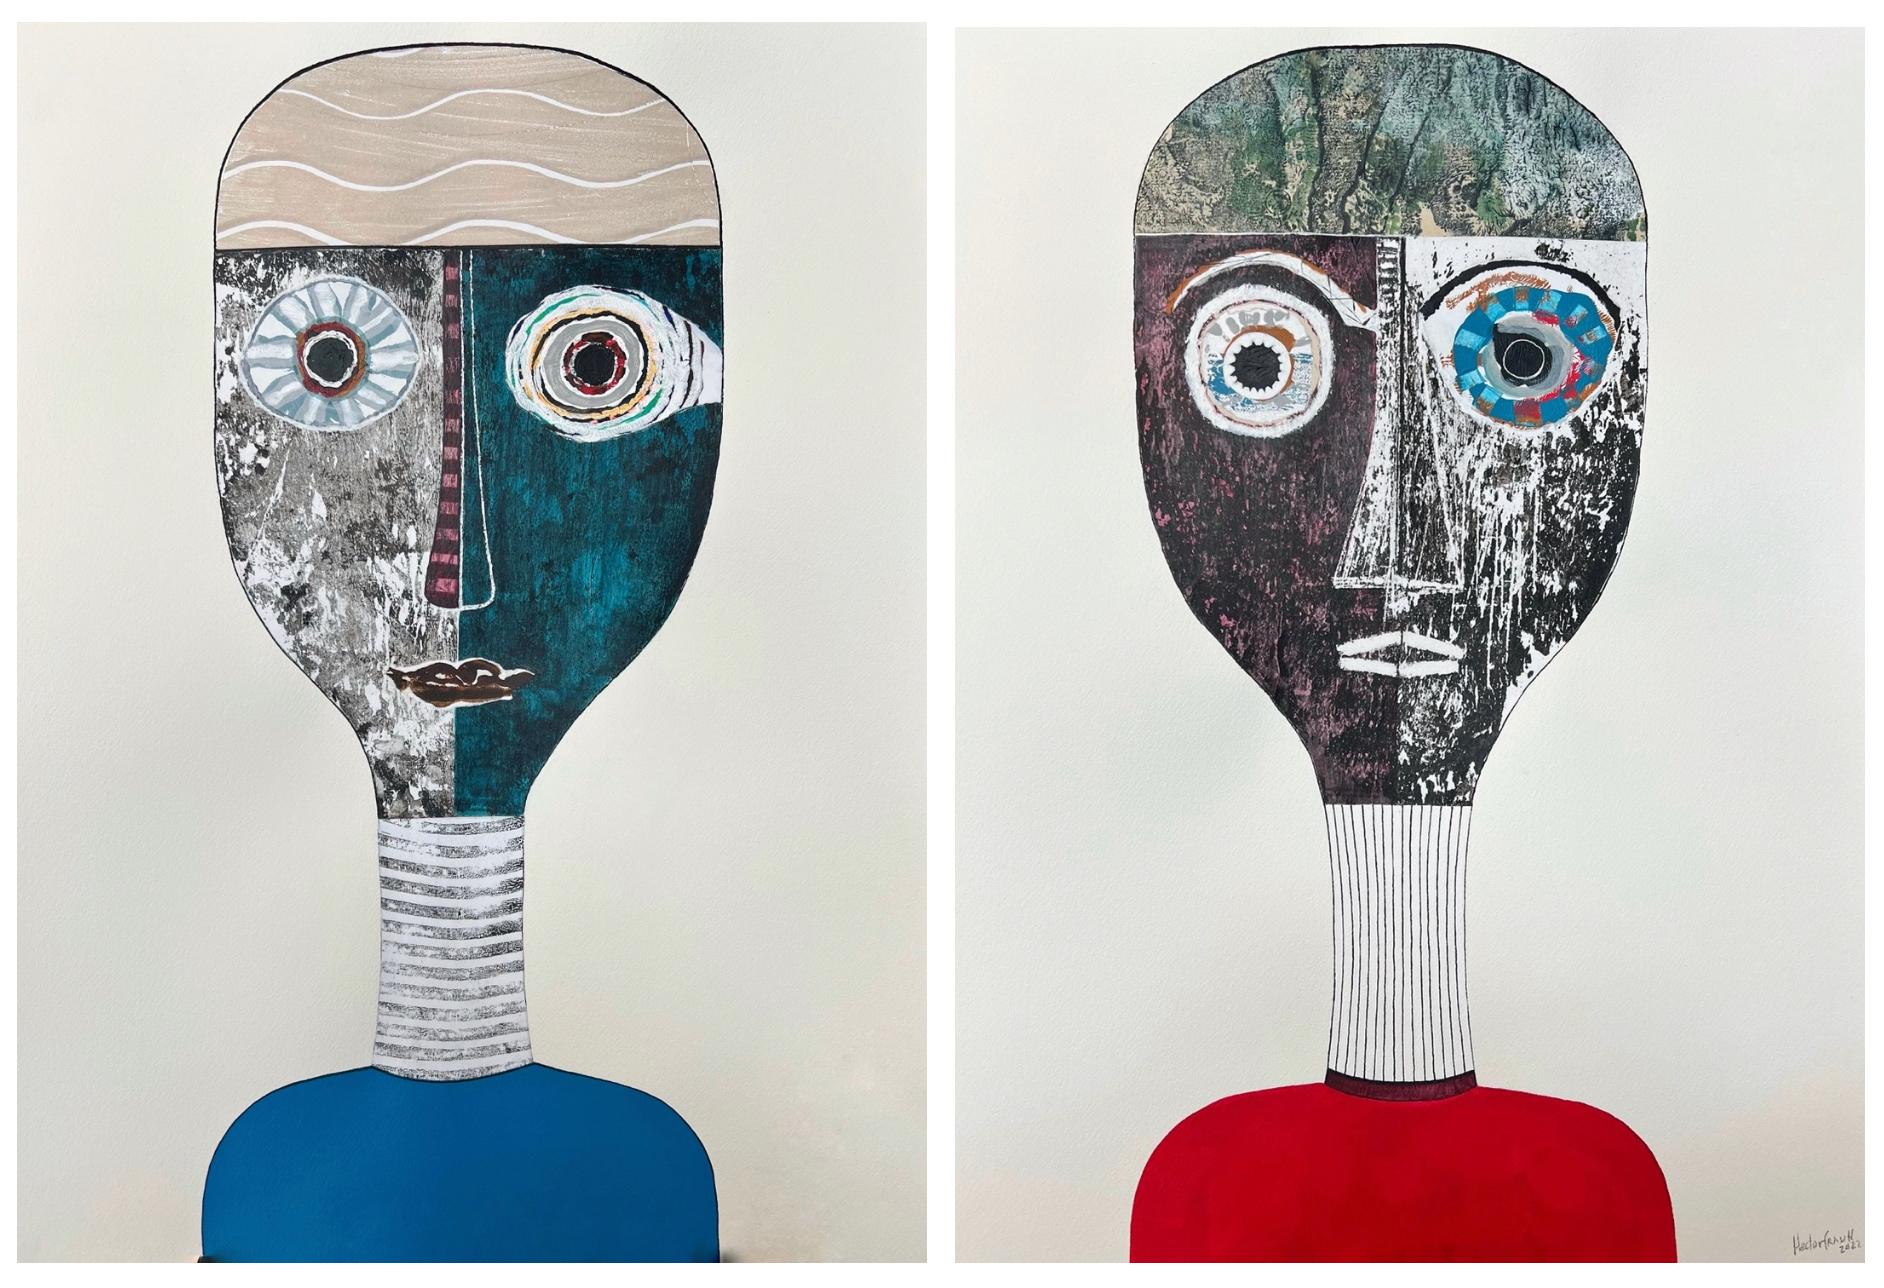 Diptych Figurative Portraits of a Man and Women, Contemporary Cuban Art - Mixed Media Art by Hector Frank